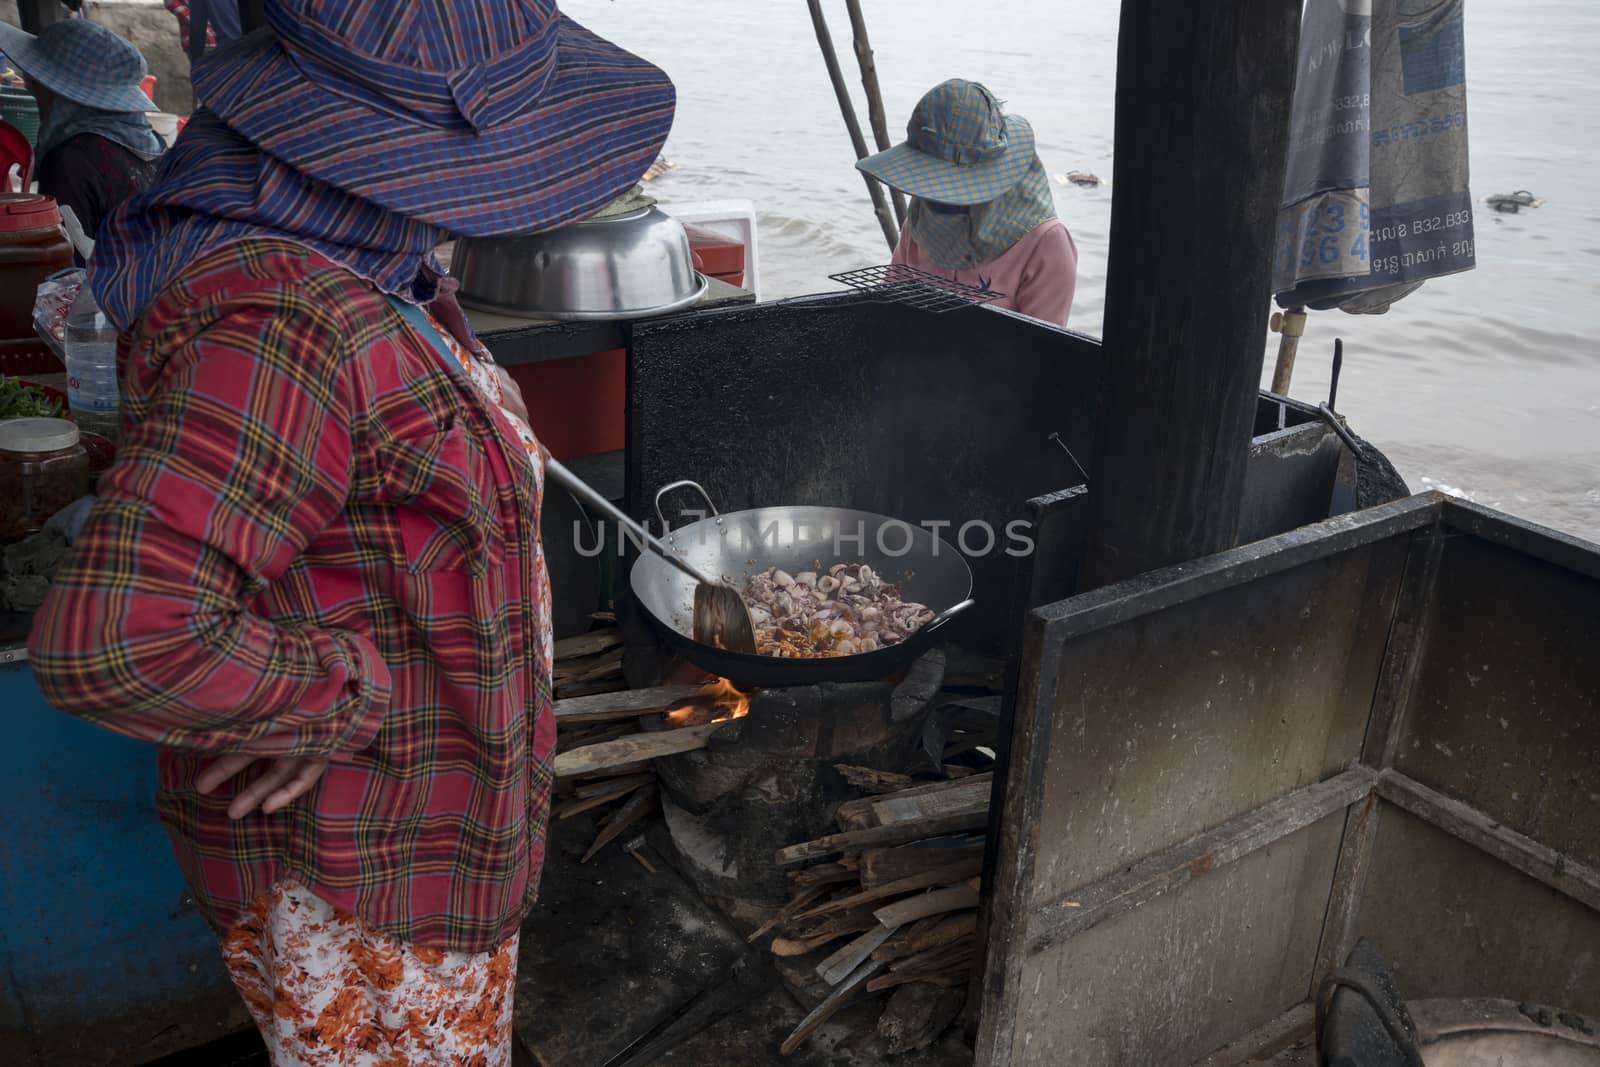 Krong Kaeb, Kep Province, Cambodia, 31 March 2018. Cambodian woman cooking octopus in a rustic kitchen at the Crab Market of Kep